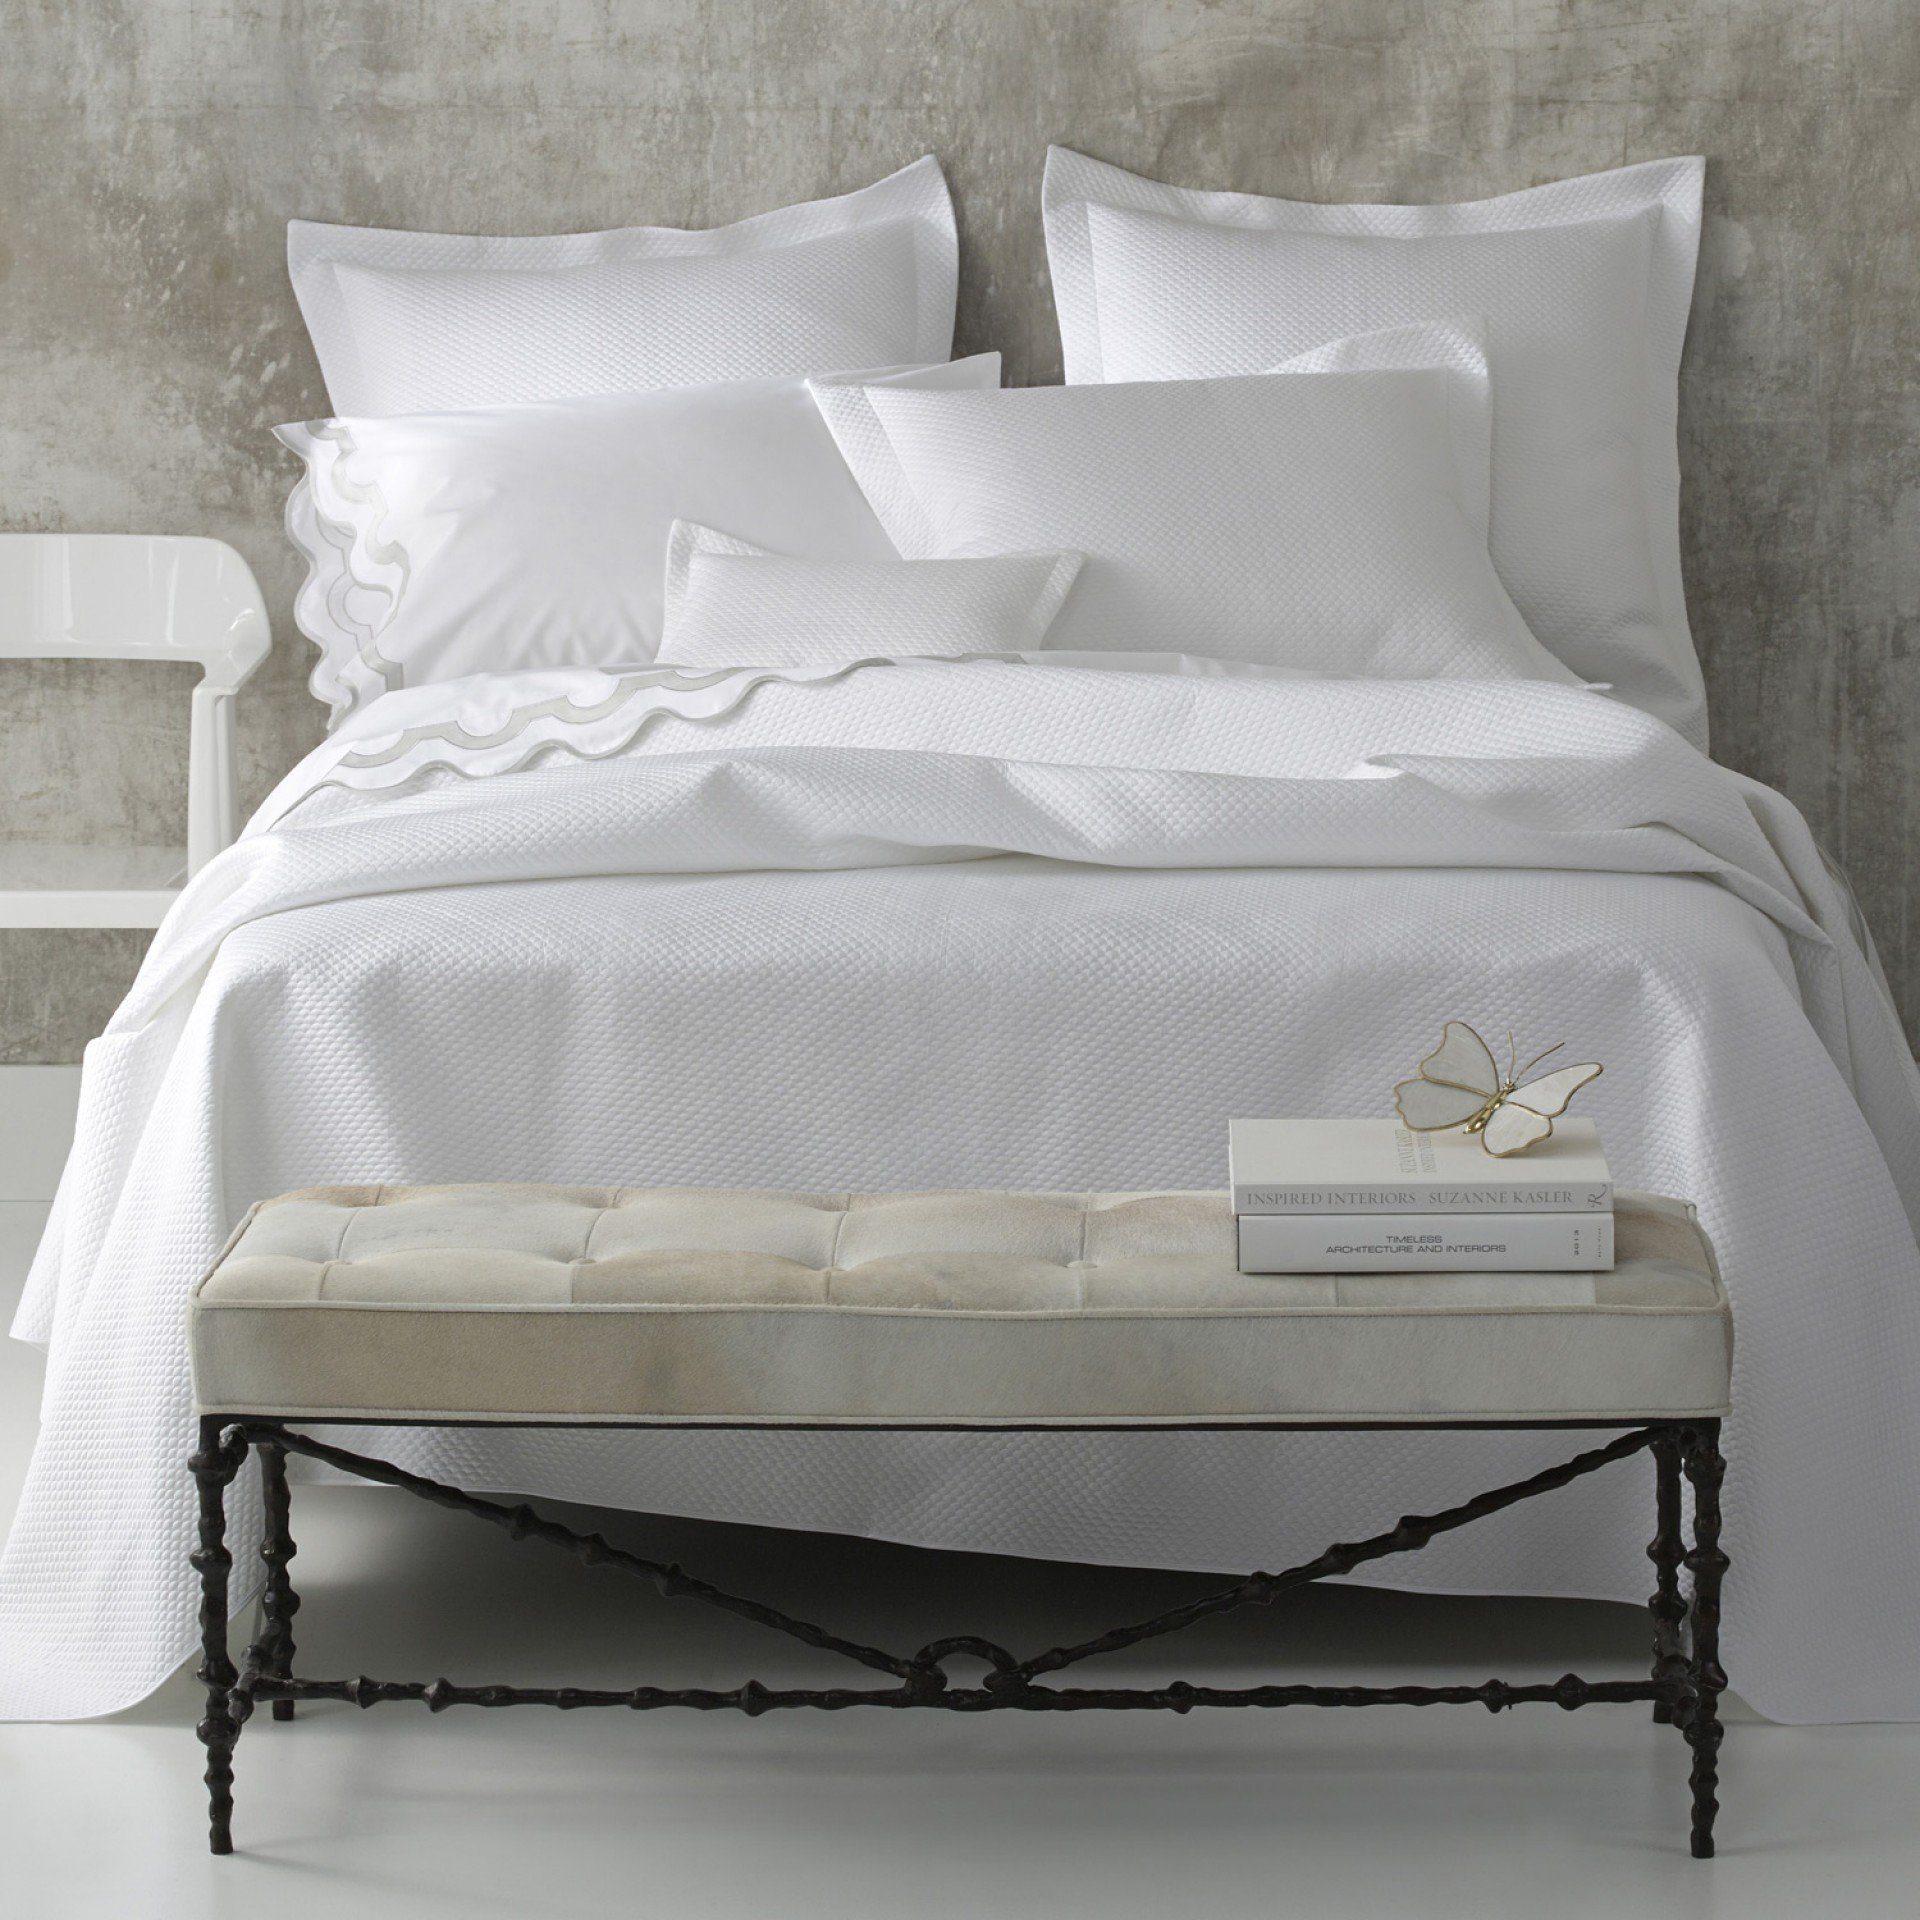 Alba Quilted Cotton Coverlet By Matouk Porter Prince